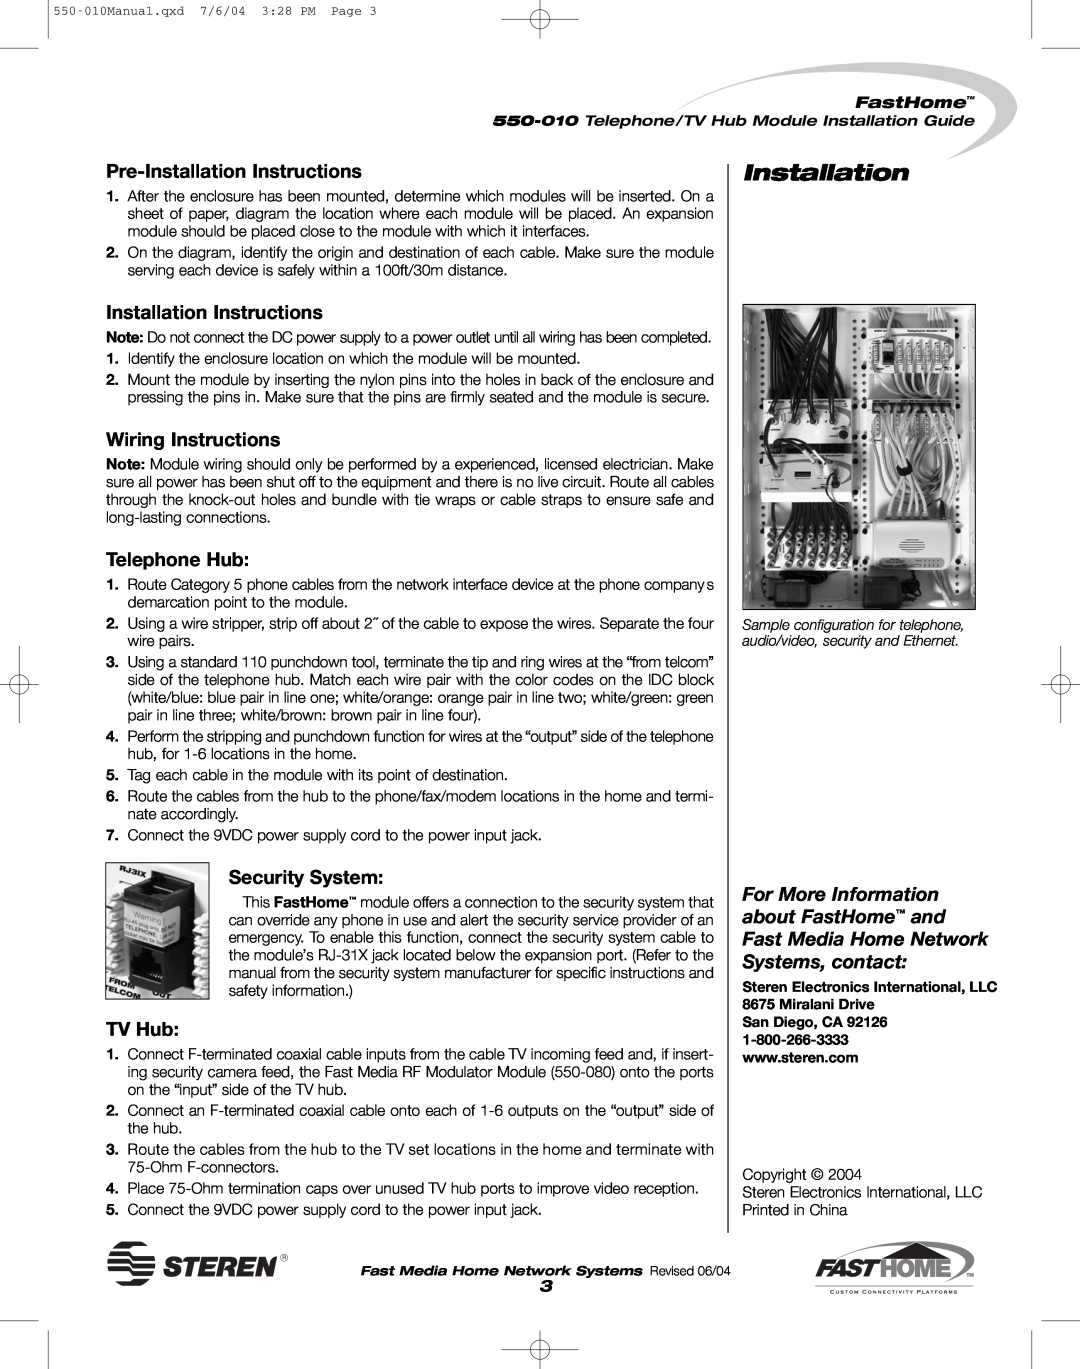 Steren 550-010 Pre-Installation Instructions, Wiring Instructions, Telephone Hub, Security System, TV Hub, FastHome 